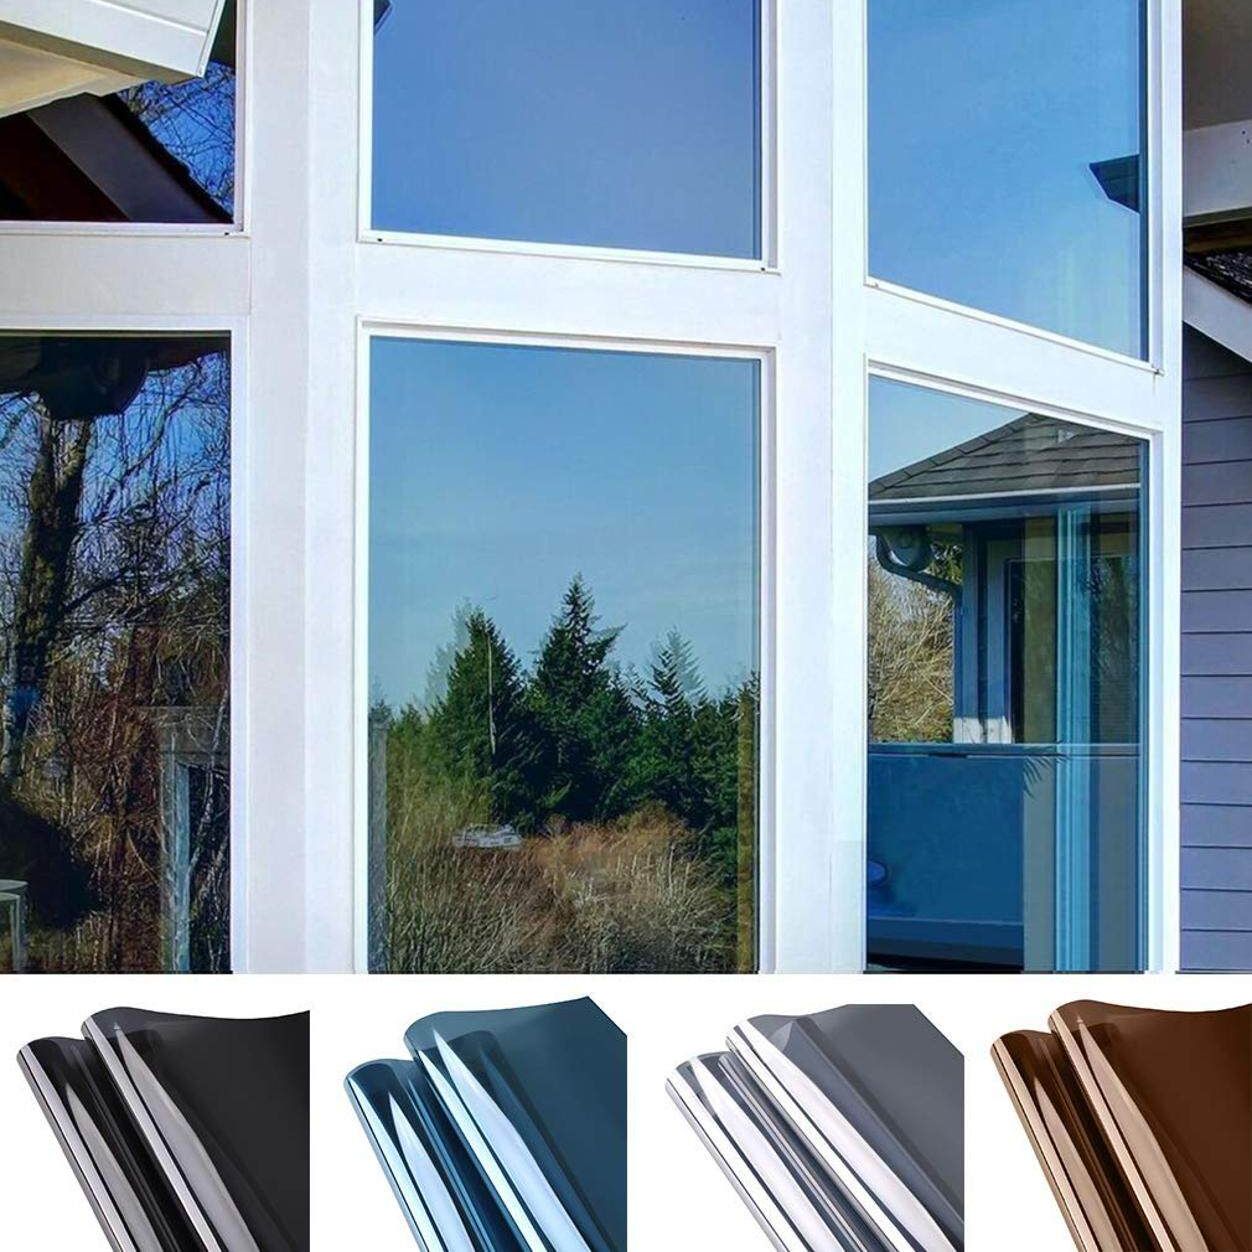 Arthome Window Tint for Home One Way Mirror Film Daytime Privacy Heat Control Reflective Sun Blocking Anti UV Solar Film Non-Adhesive Static Cling